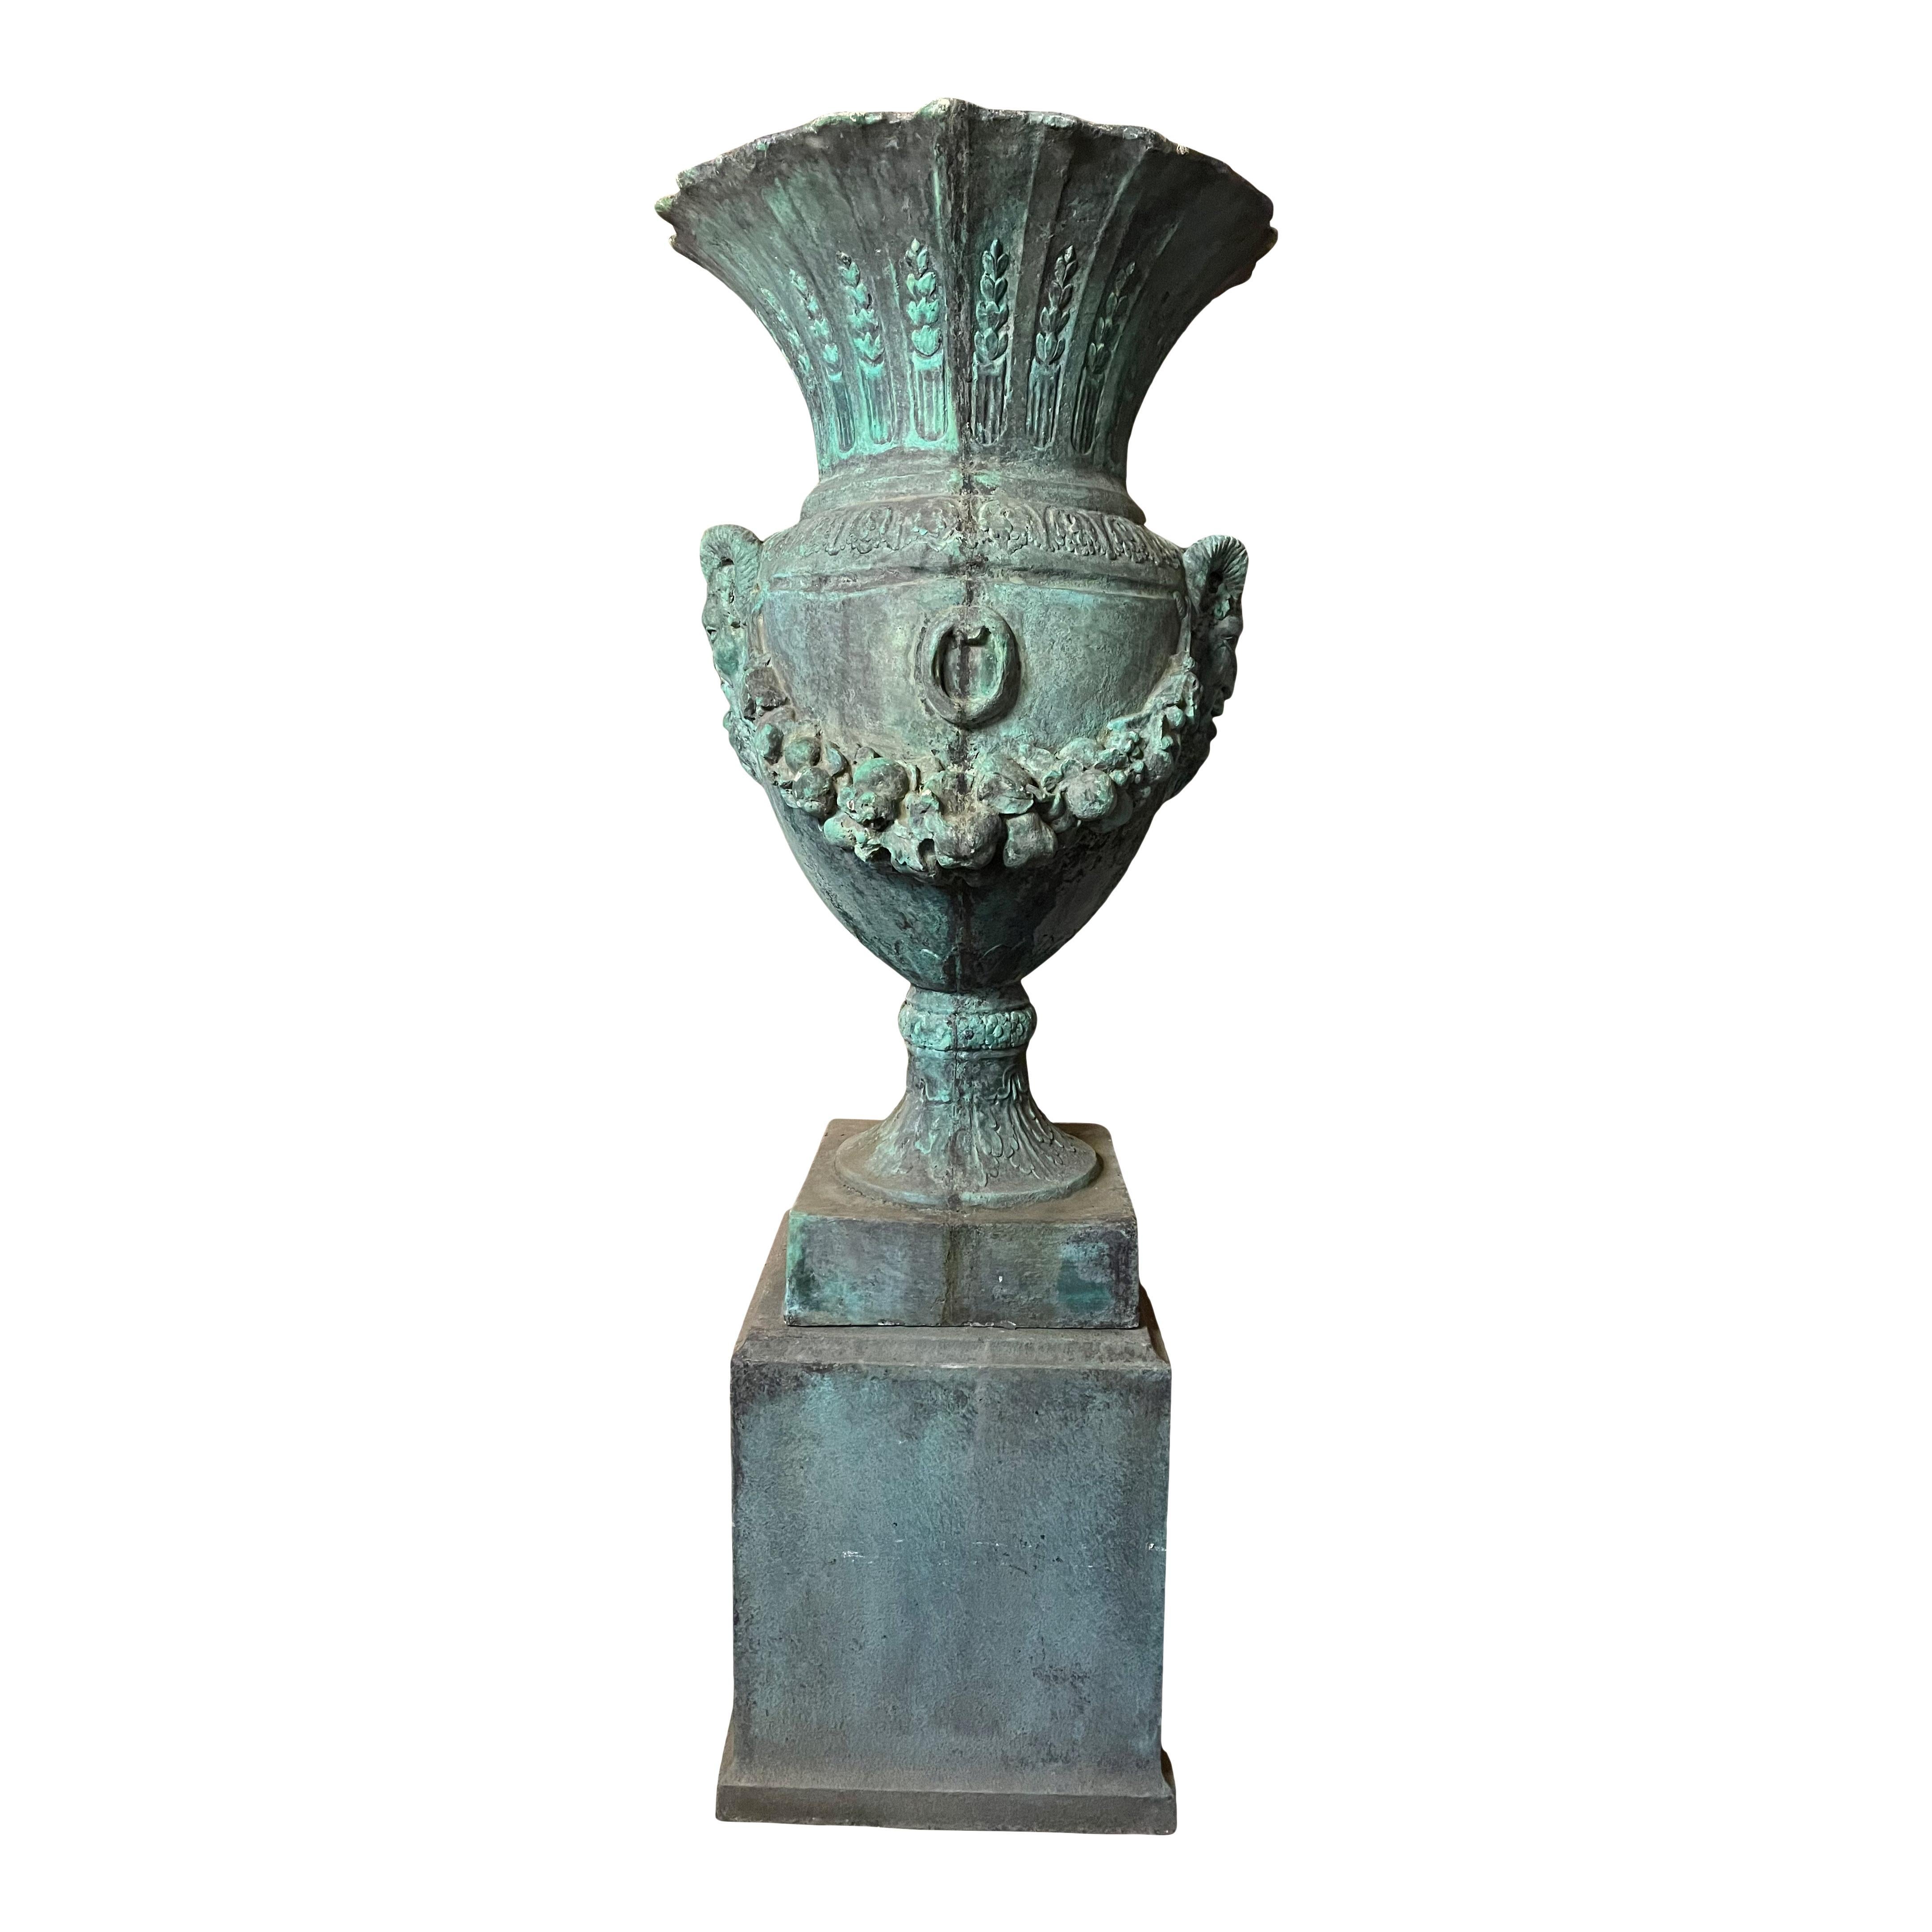 If you're looking to make a statement at the front of the drive or just looking for that piece with some wow factor in the back garden, this monumental verdi gris fibeglass, 20th century classical urn on pedestal could certainly be the piece to do